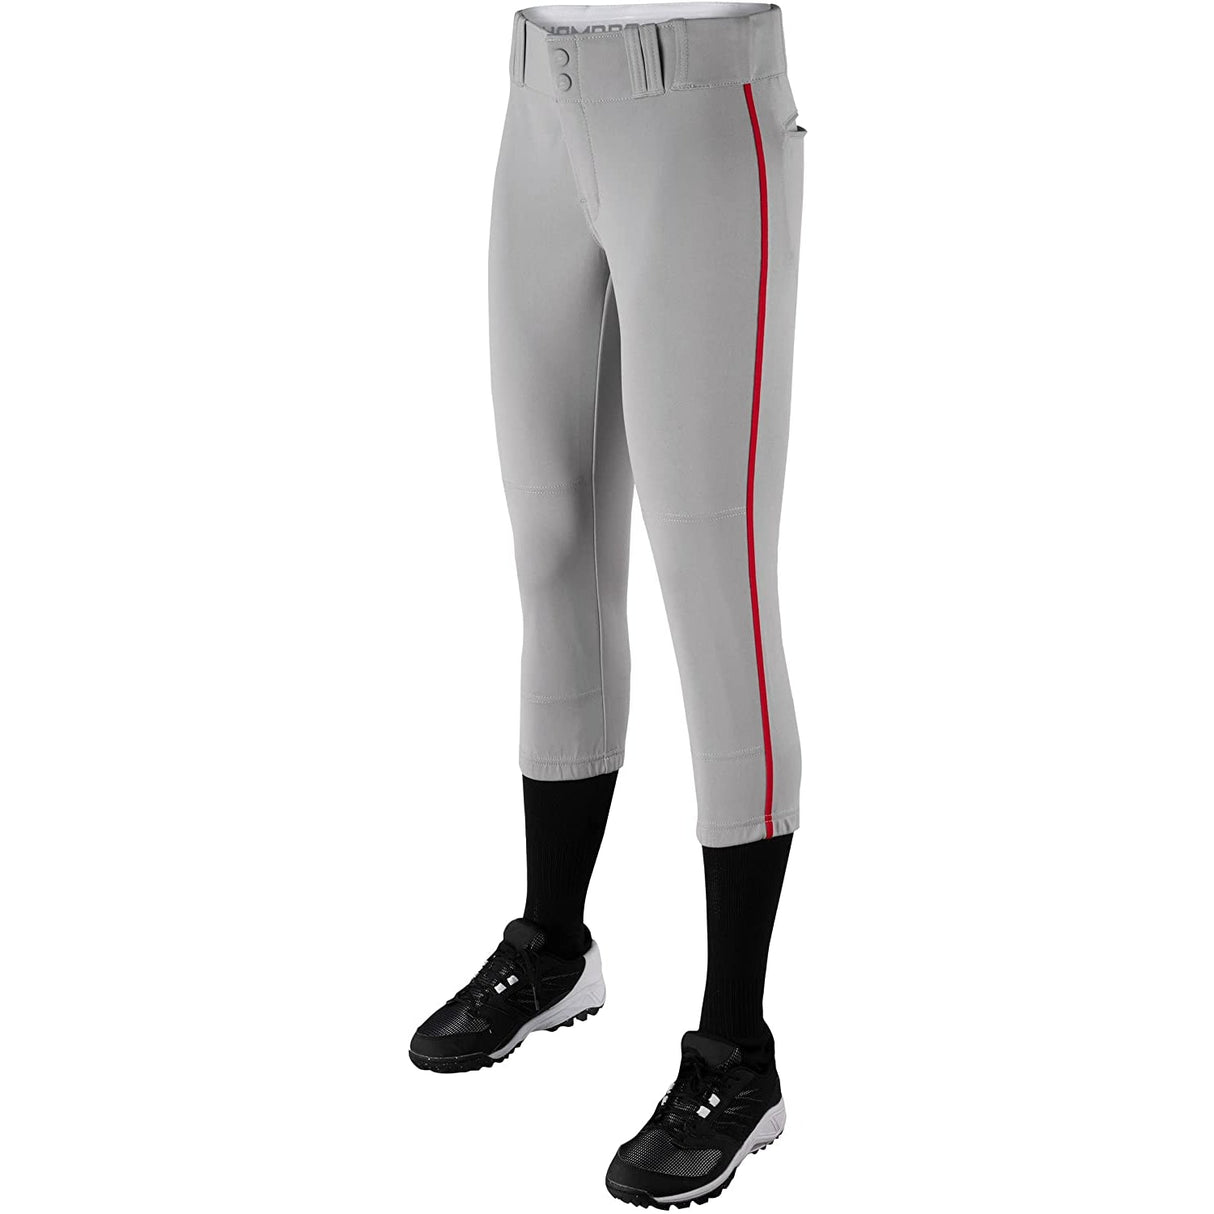 Easton Pro Fastpitch Women's Softball Piped Belt Loops Pants